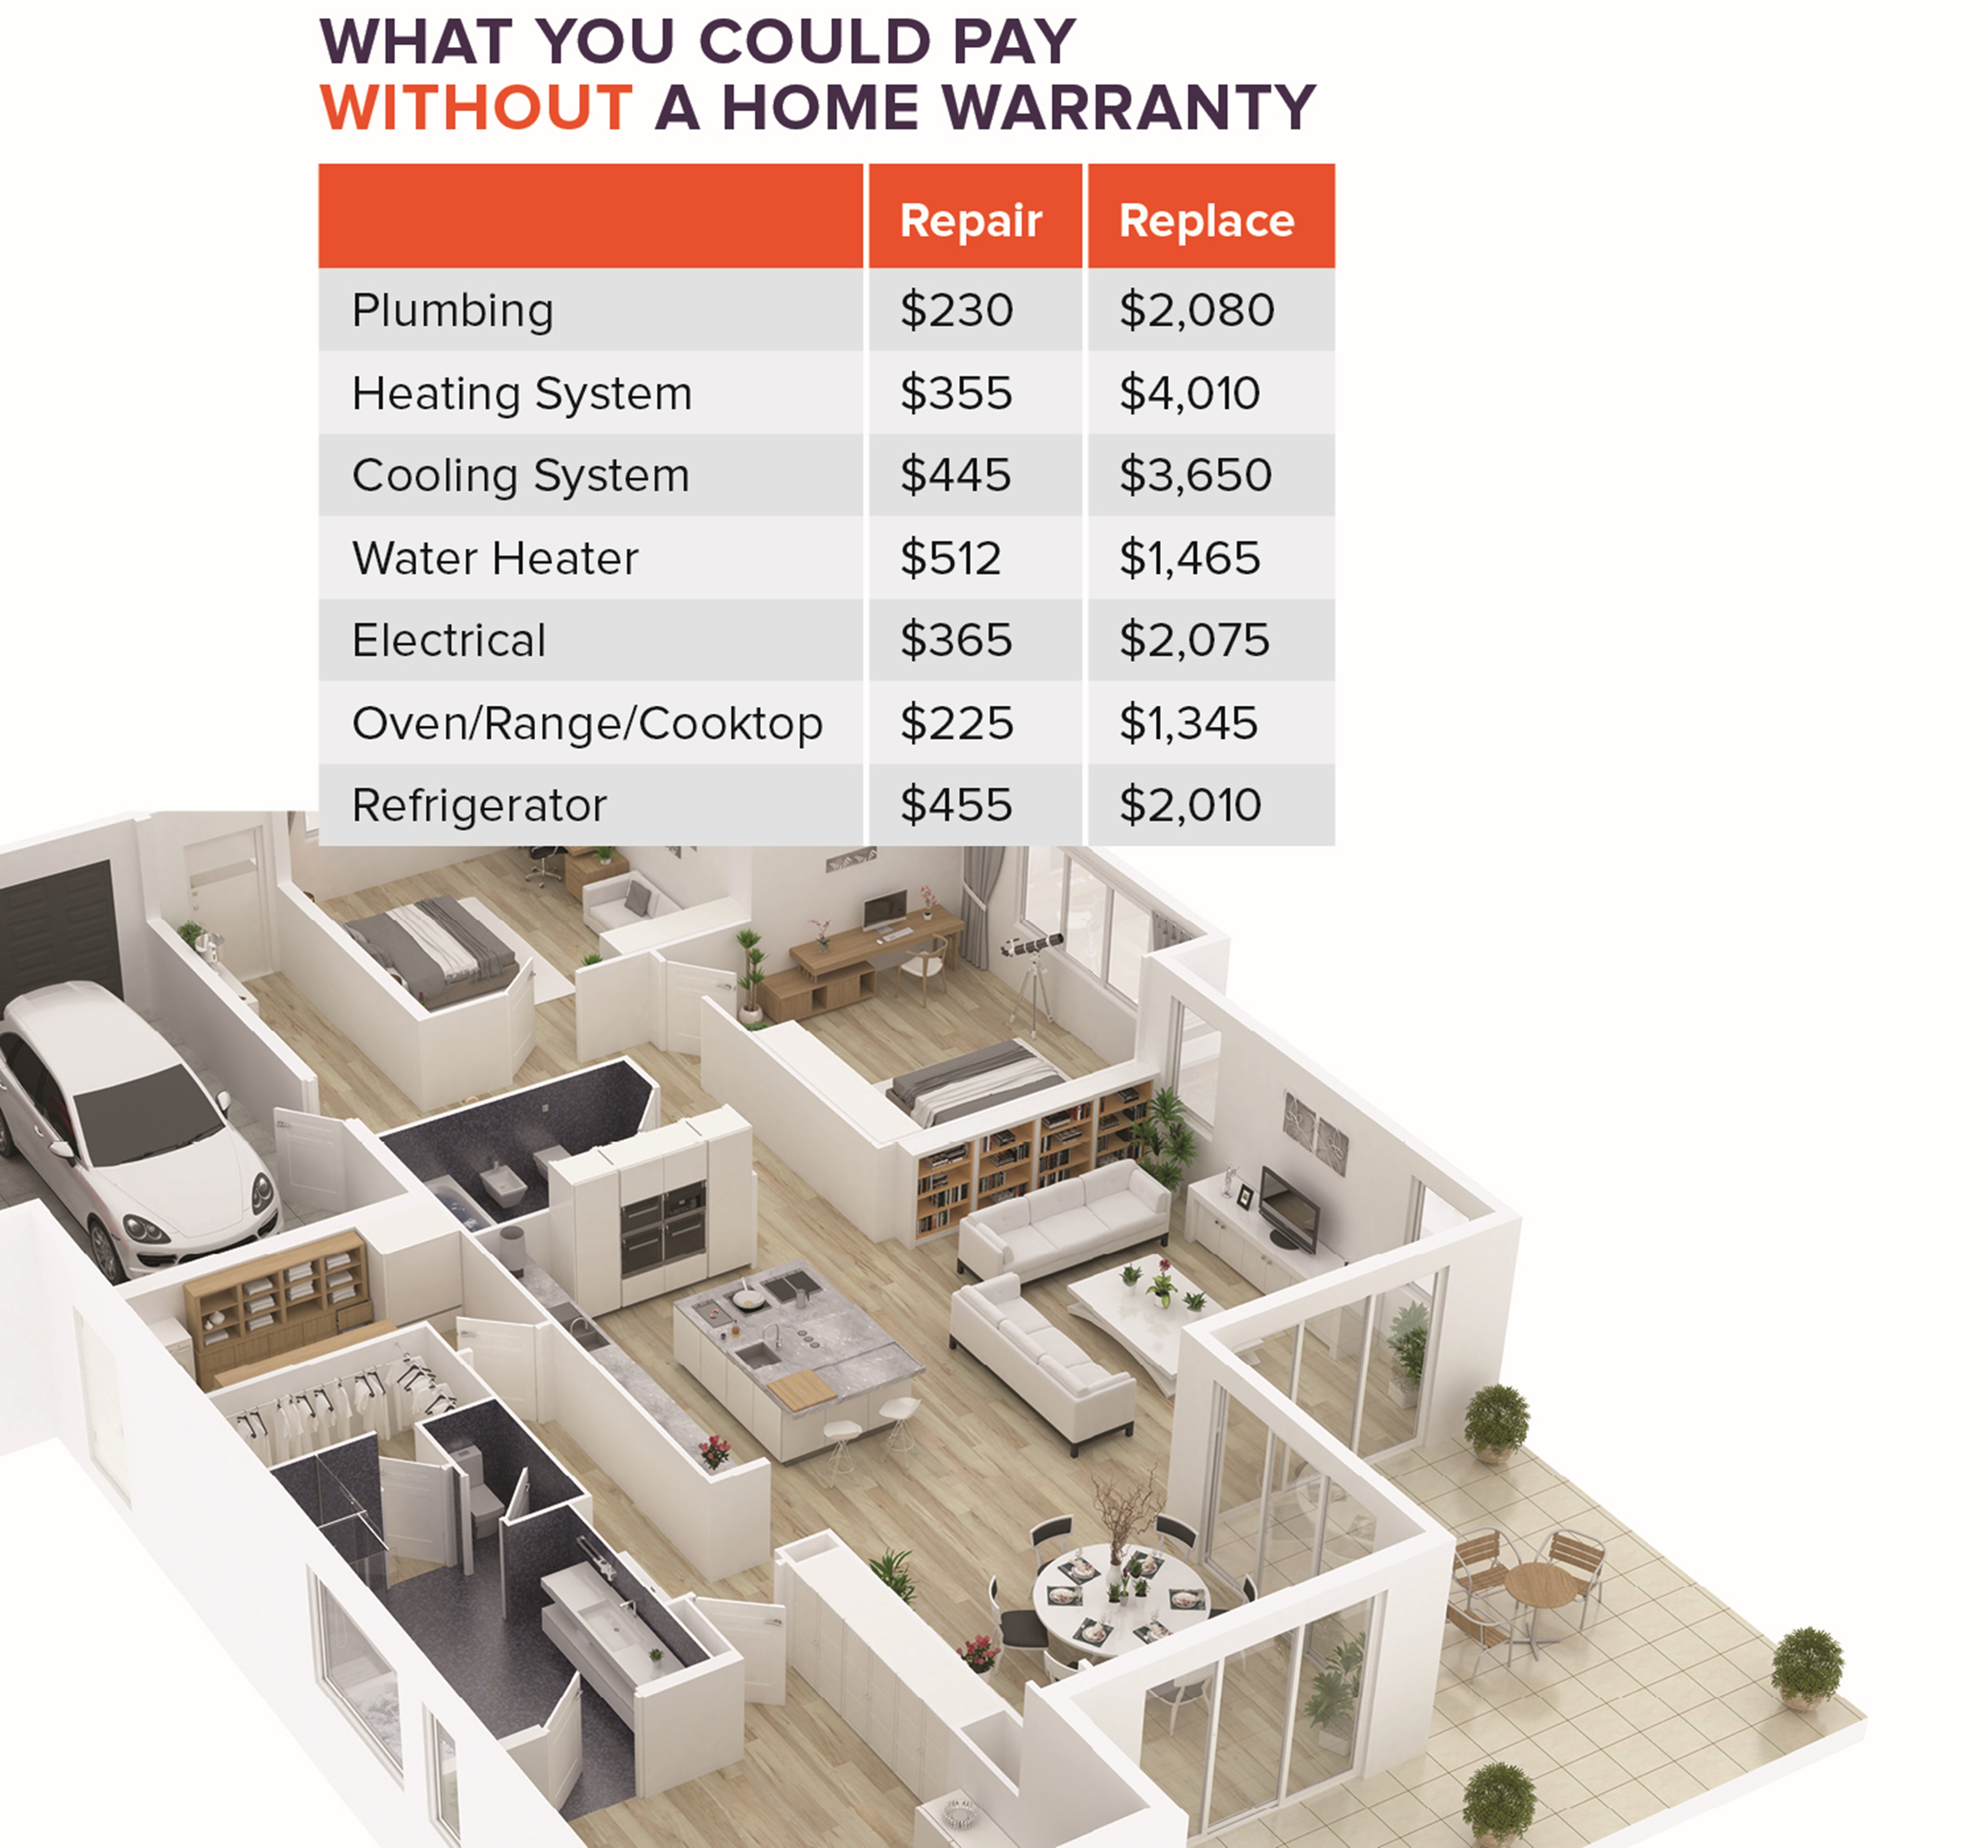 chart showing prices you could pay without a warranty